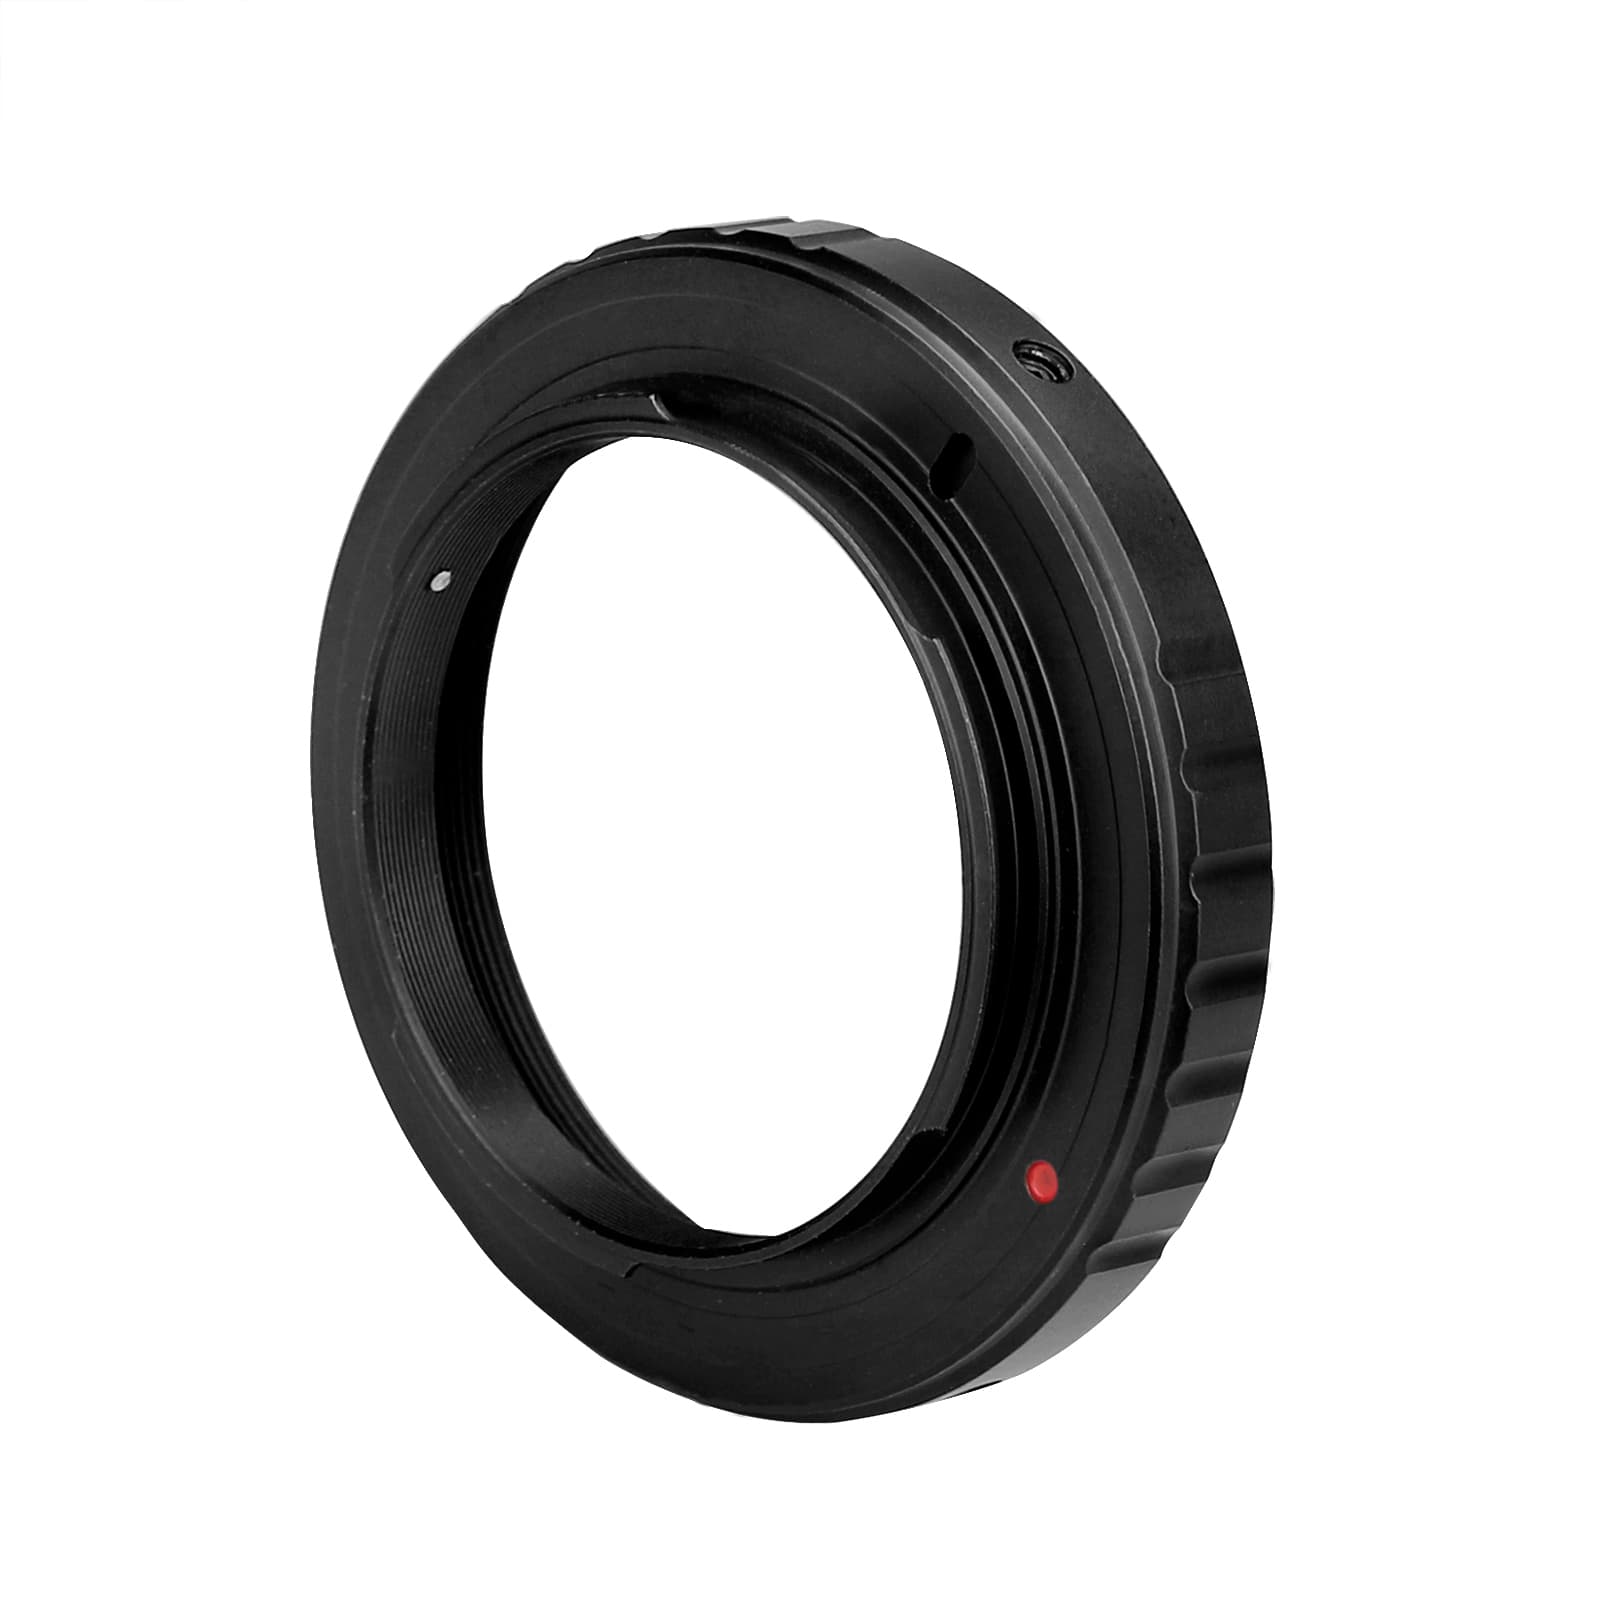 Svbony Accessory Wide (48mm) T-Ring Adapter For Nikon Svbony T-Ring for Nikon Cameras - W1077